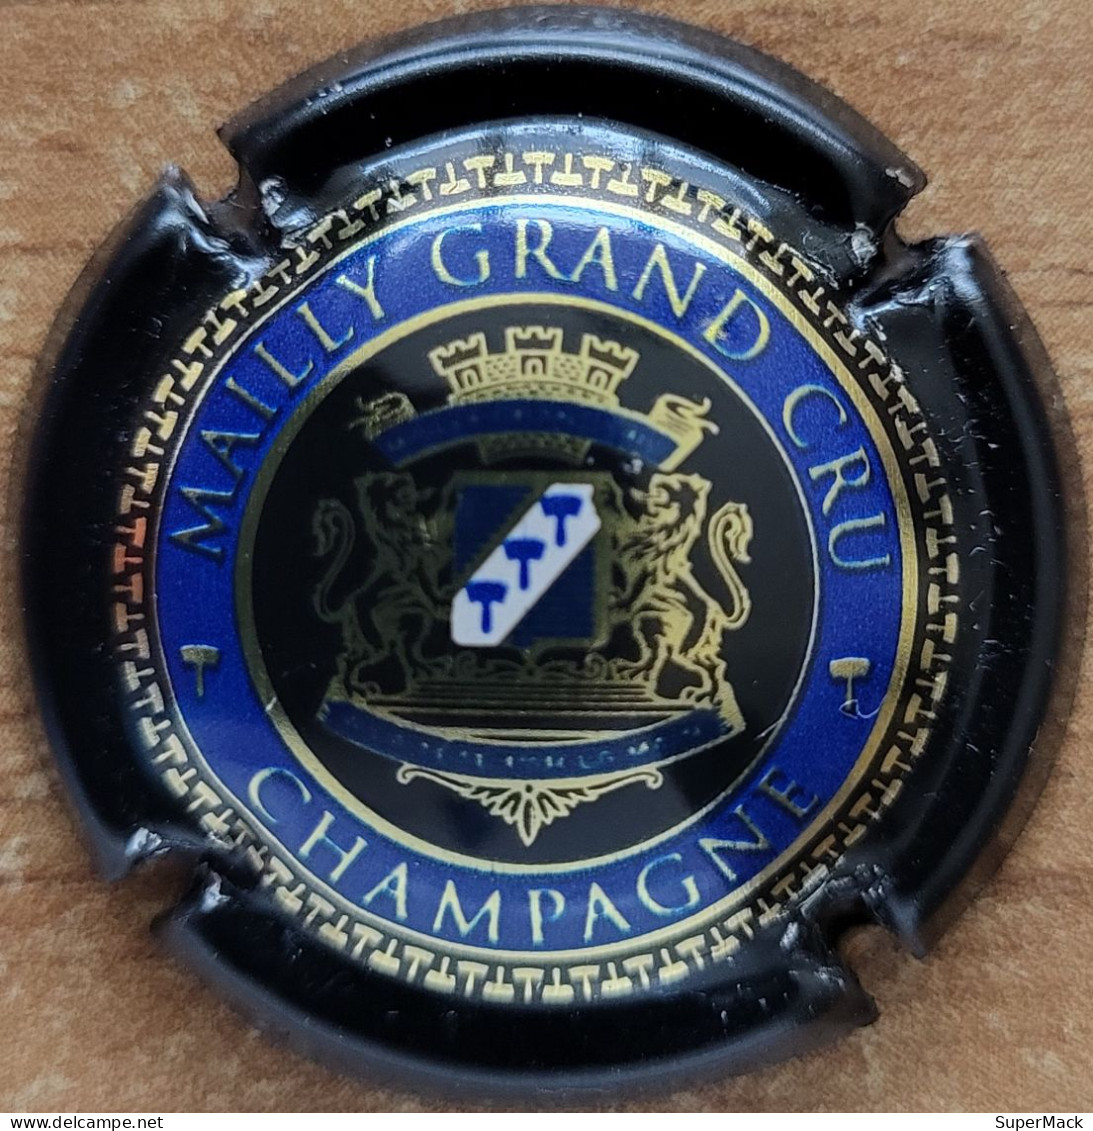 Capsule Champagne MAILLY GRAND CRU Série Mailly Grand Cru En Circulaire, Cercle Bleu Roi & Or Nr 12h - Mailly Champagne